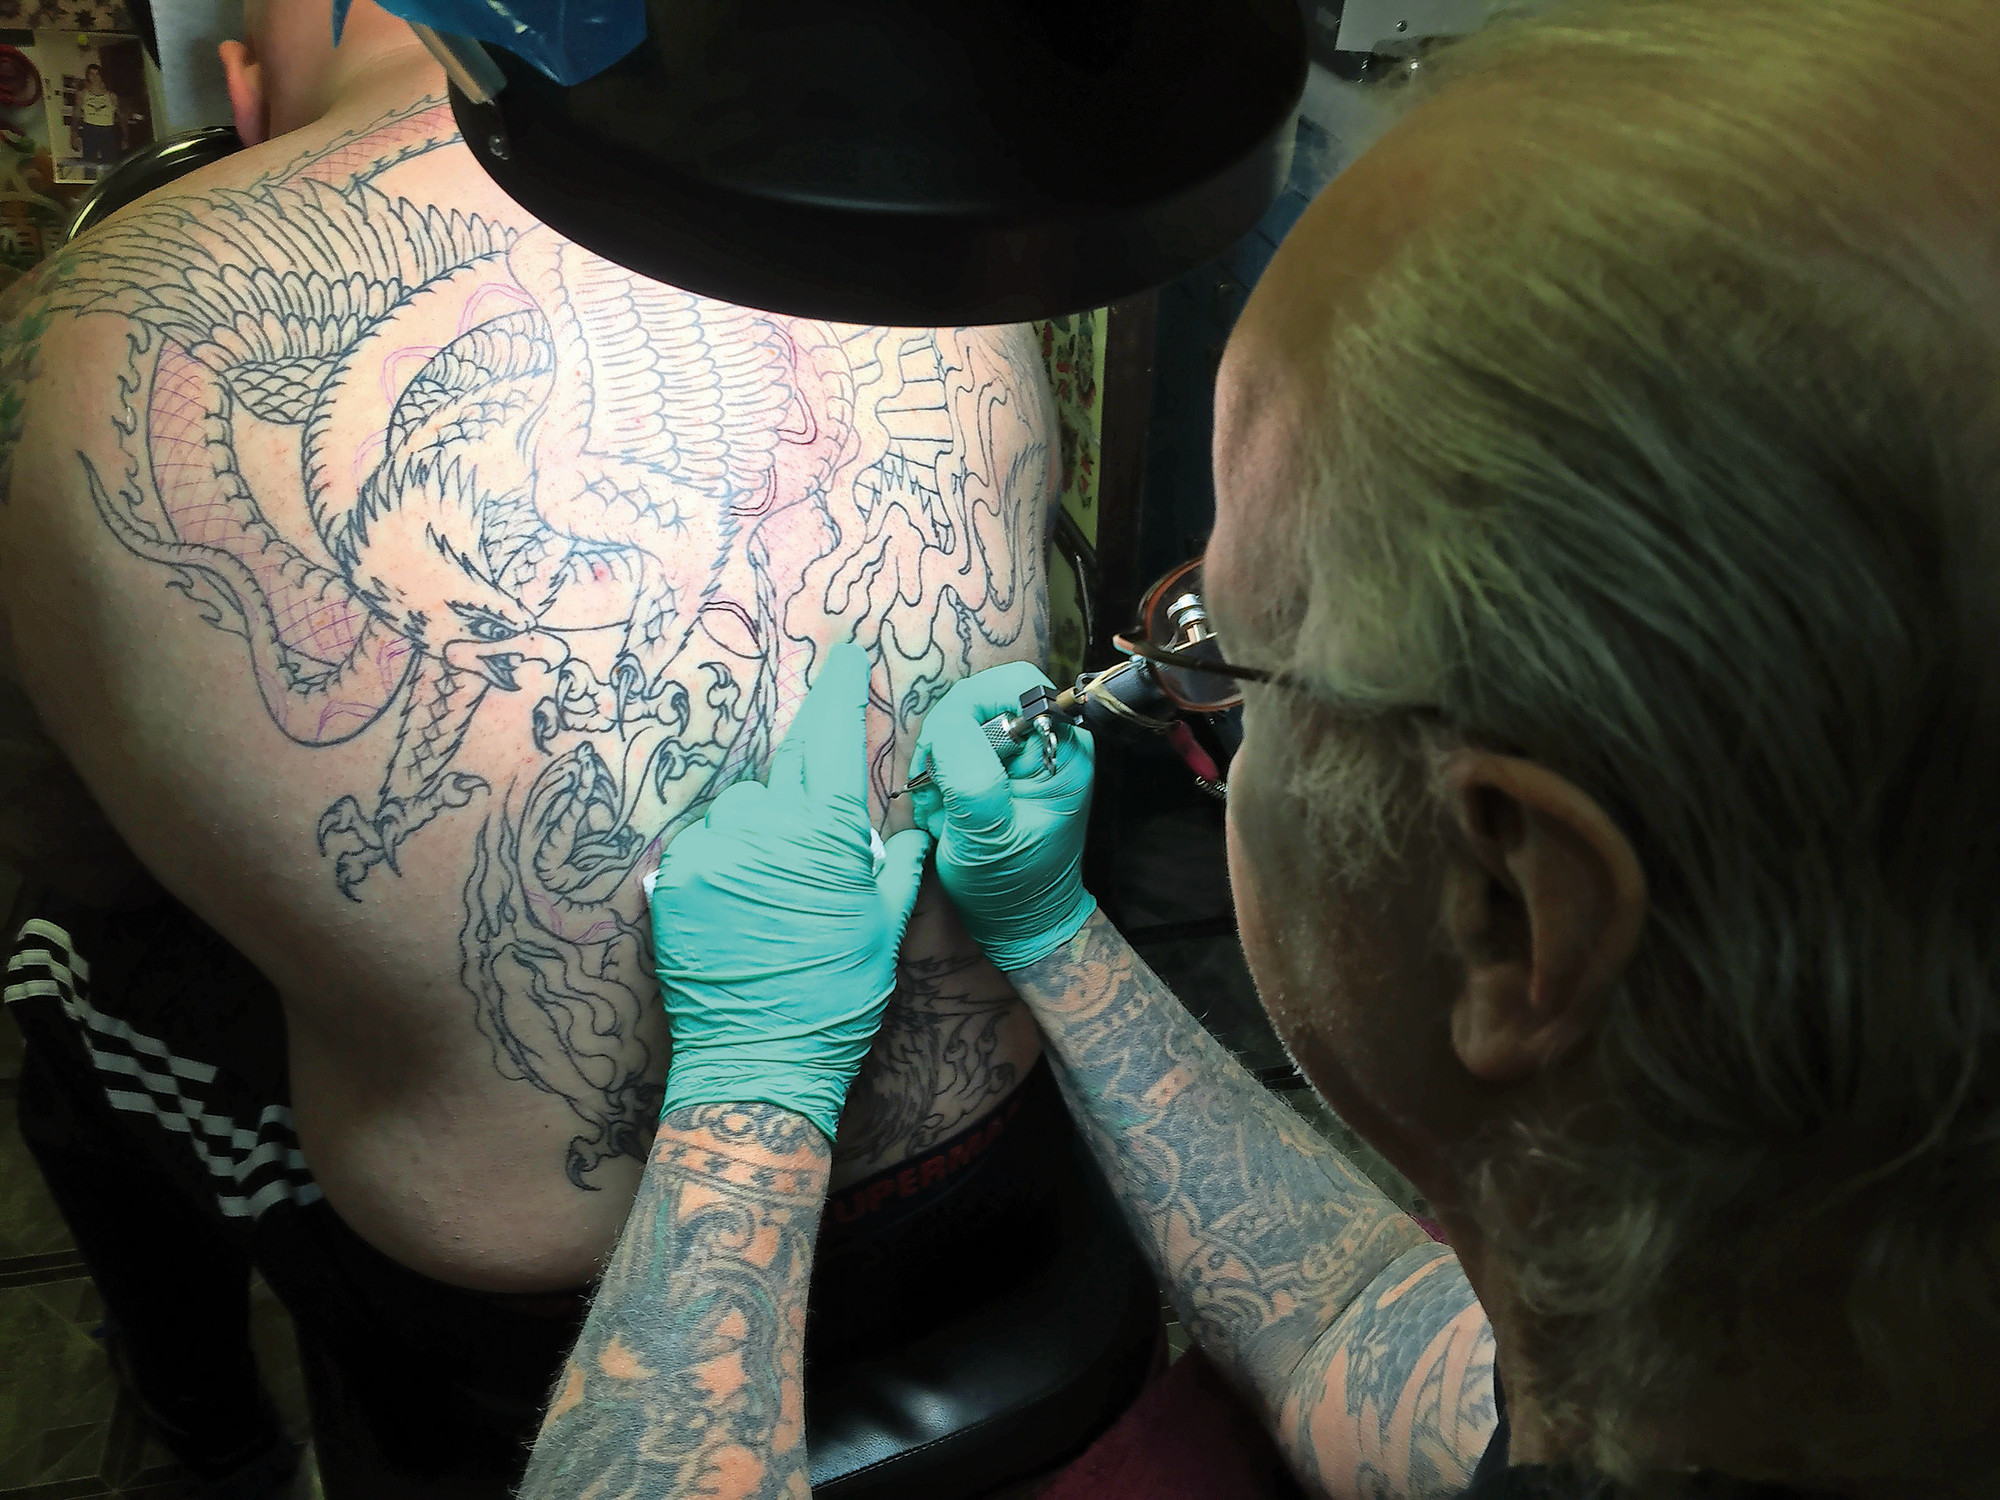 Eric Voye, of East Meadow, sat in a chair for two hours while Richie Montgomery, owner of Tattoo on Hempstead Turnpike in Elmont, crafted his tattoo.